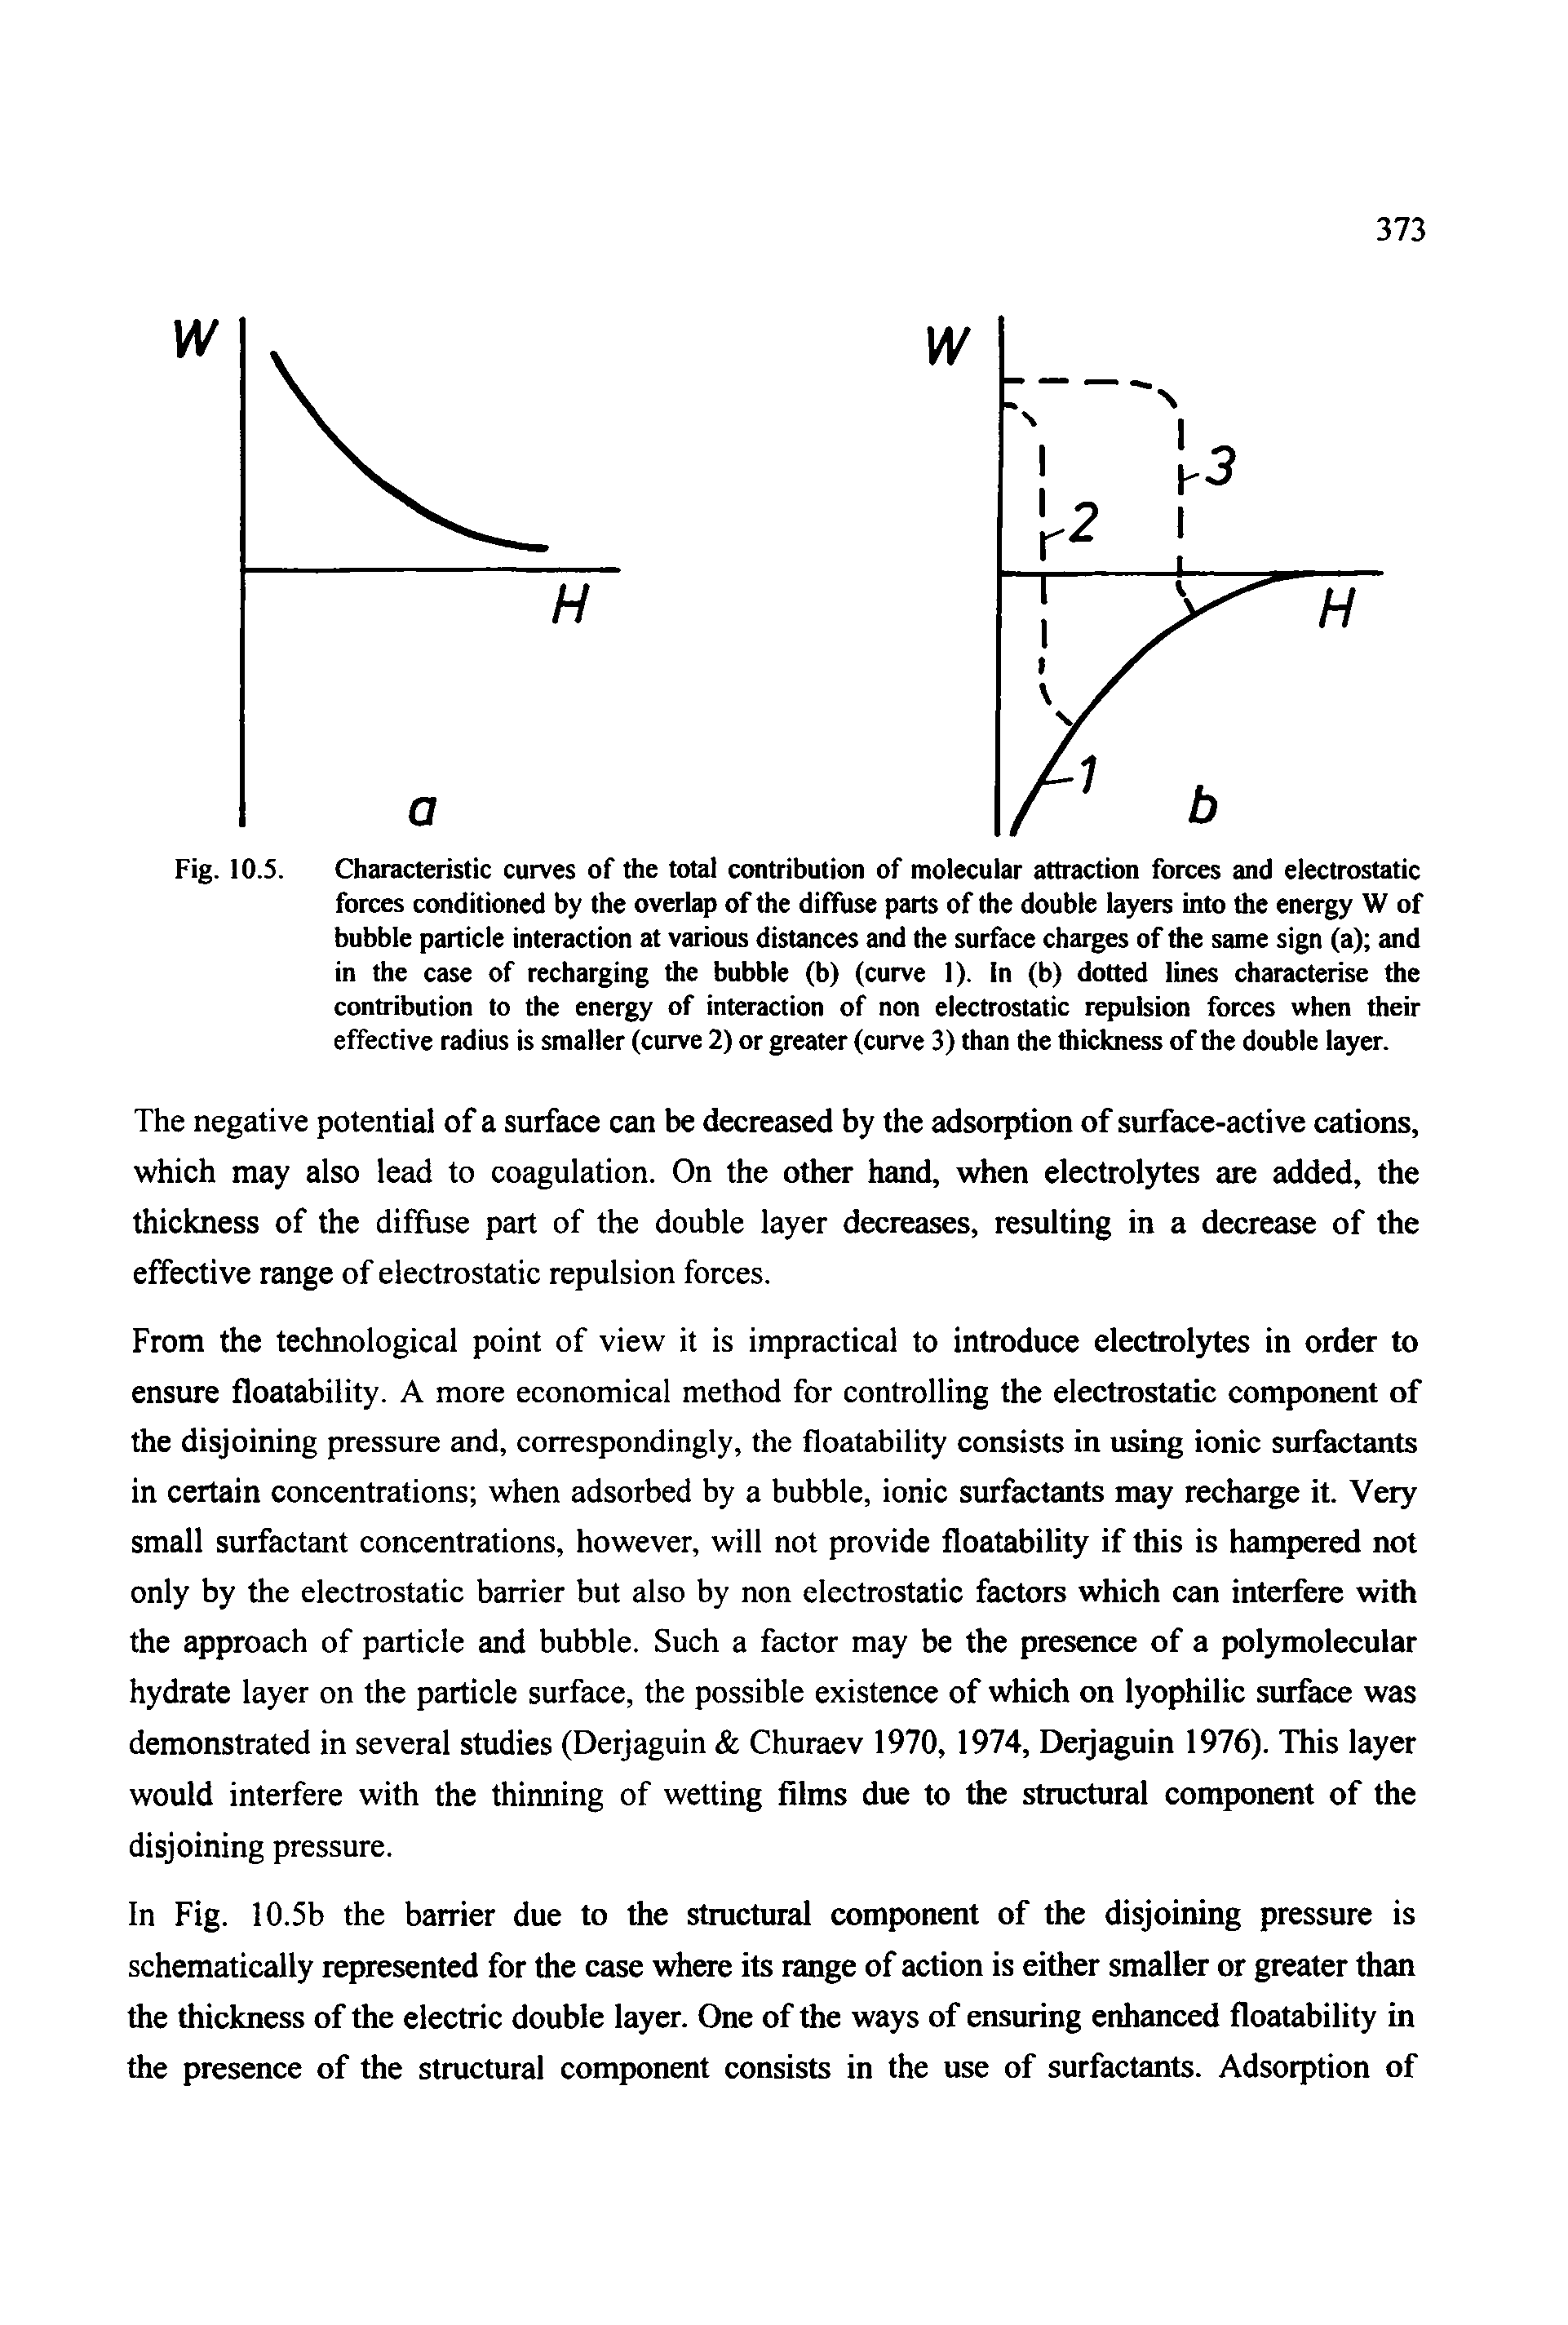 Fig. 10.5. Characteristic curves of the total contribution of molecular attraction forces and electrostatic forces conditioned by the overlap of the diffuse parts of the double layers into the energy W of bubble particle interaction at various distances and the surface charges of the same sign (a) and in the case of recharging the bubble (b) (curve I). in (b) dotted lines characterise the contribution to the energy of interaction of non electrostatic repulsion forces when their effective radius is smaller (curve 2) or greater (curve 3) than the thickness of the double layer.